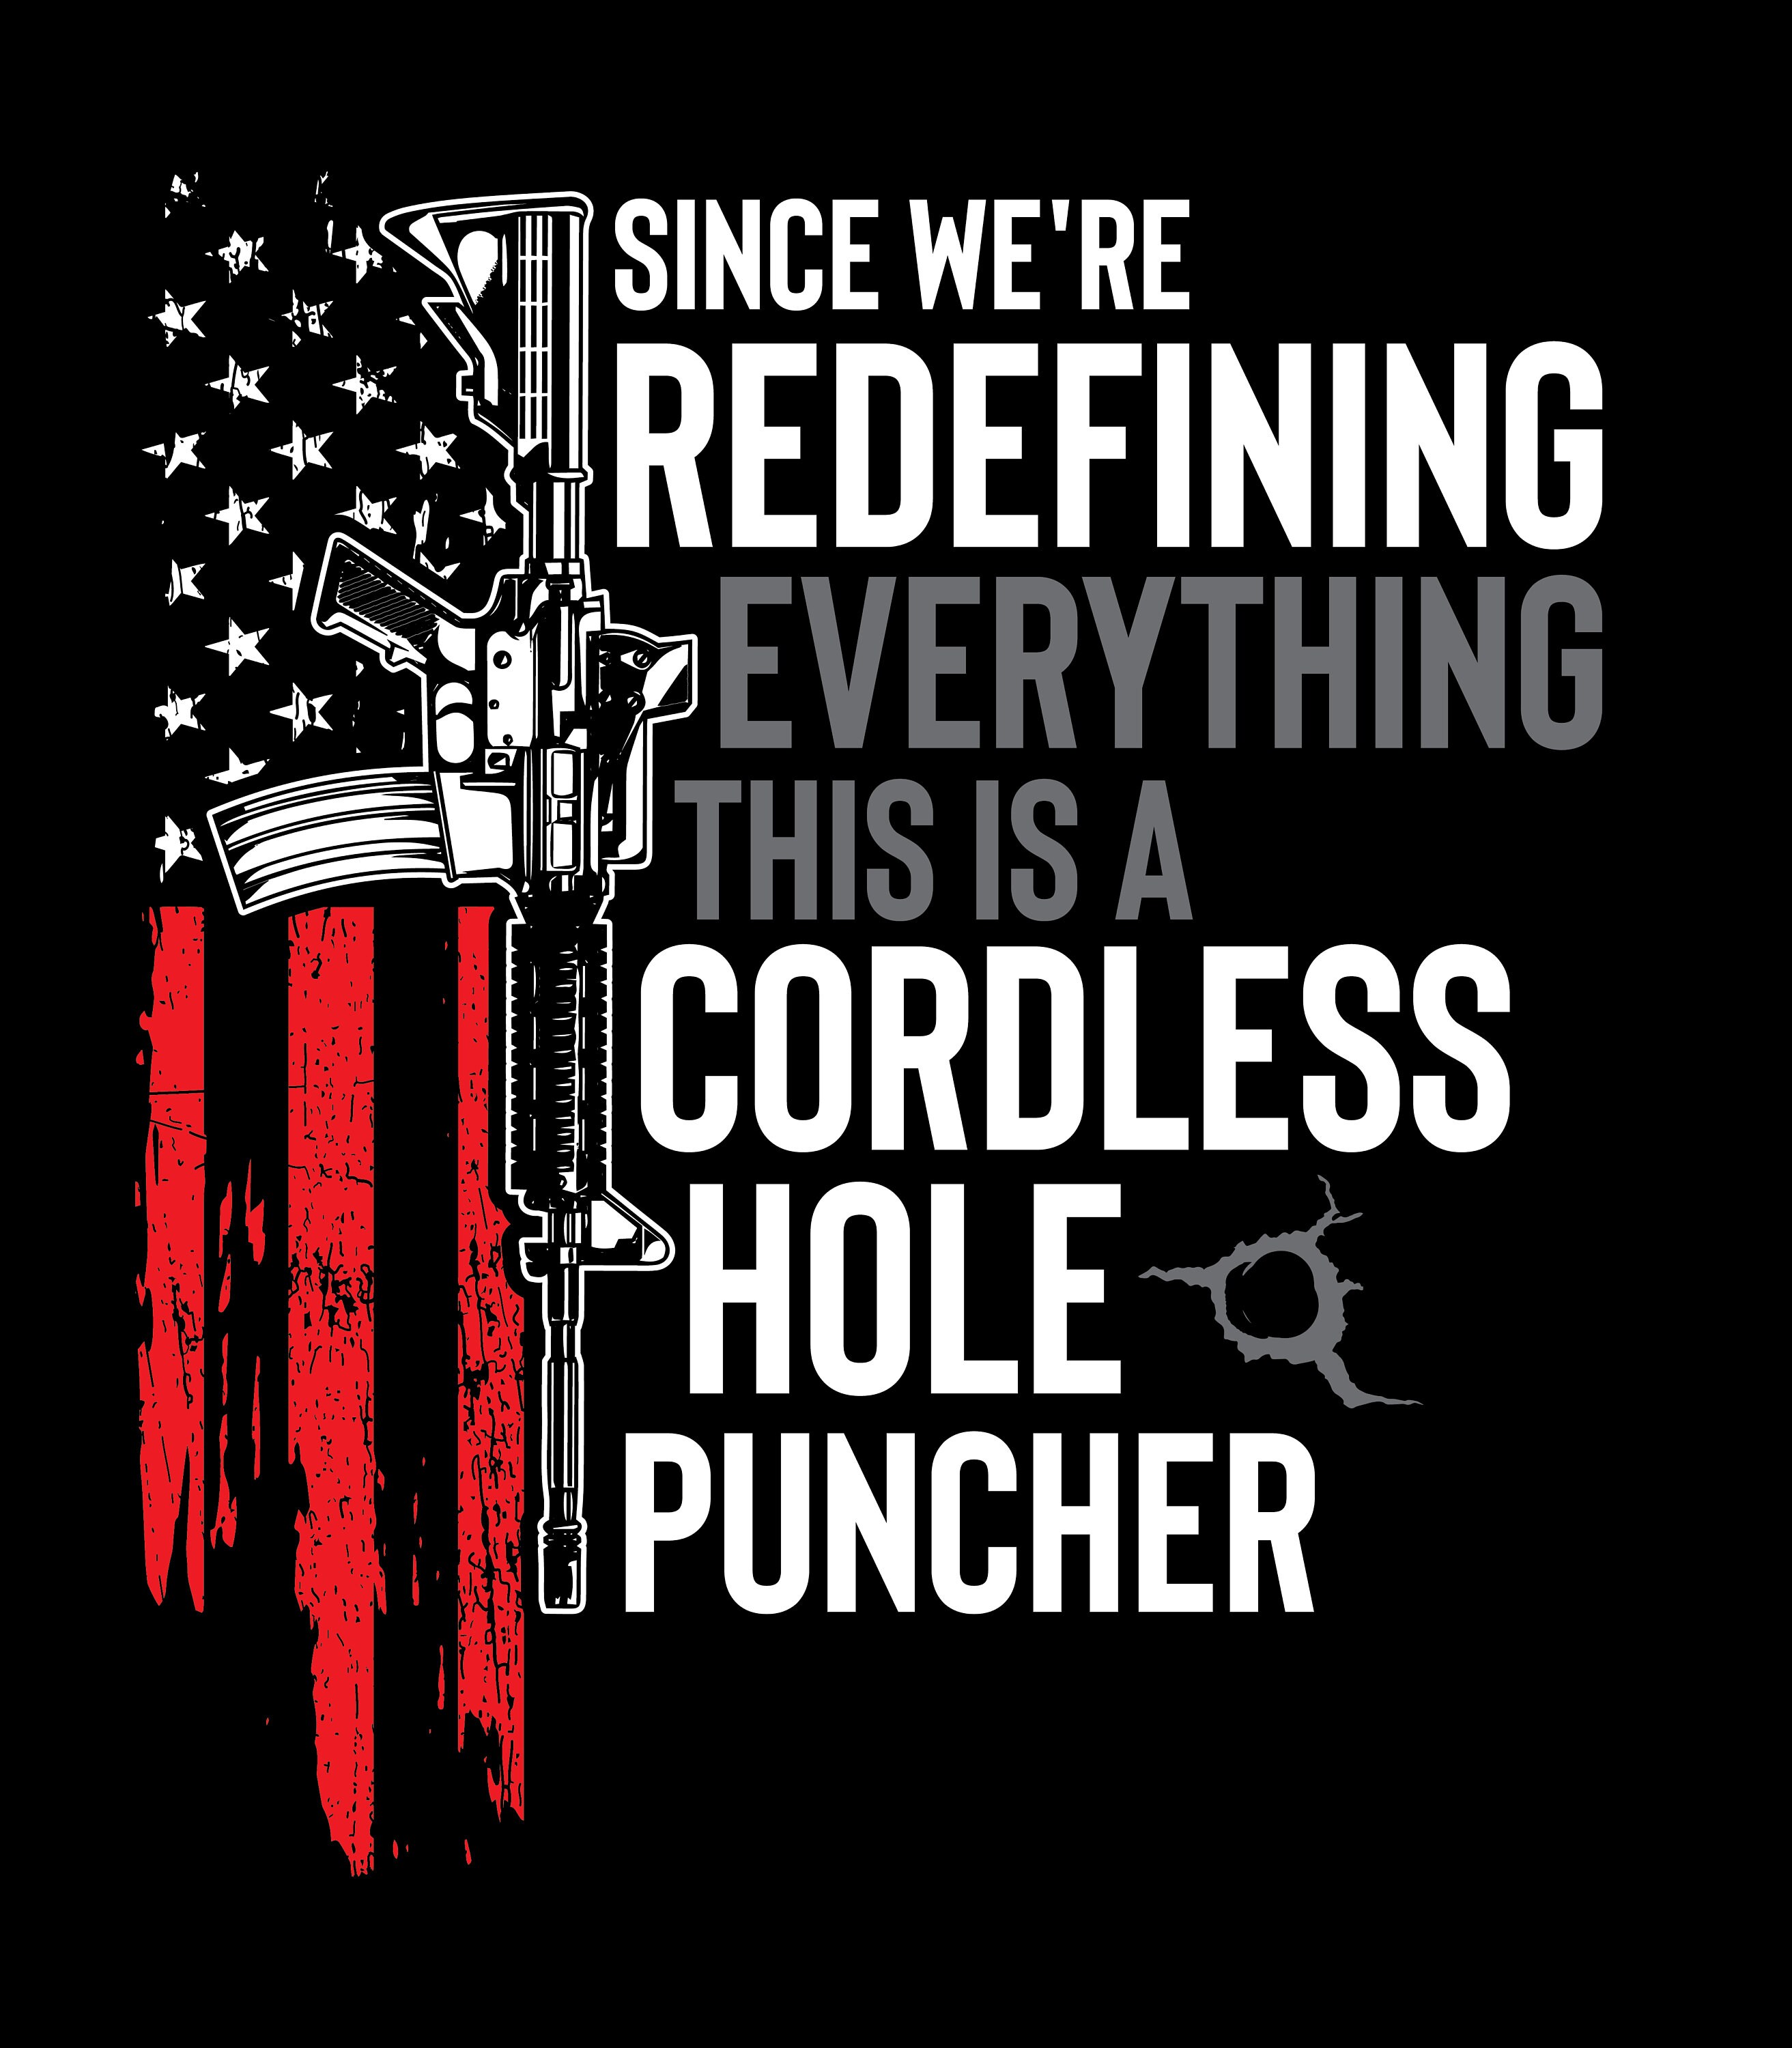 Since we're redefining everything this is a cordless hole puncher American Workers 3D T-shirt